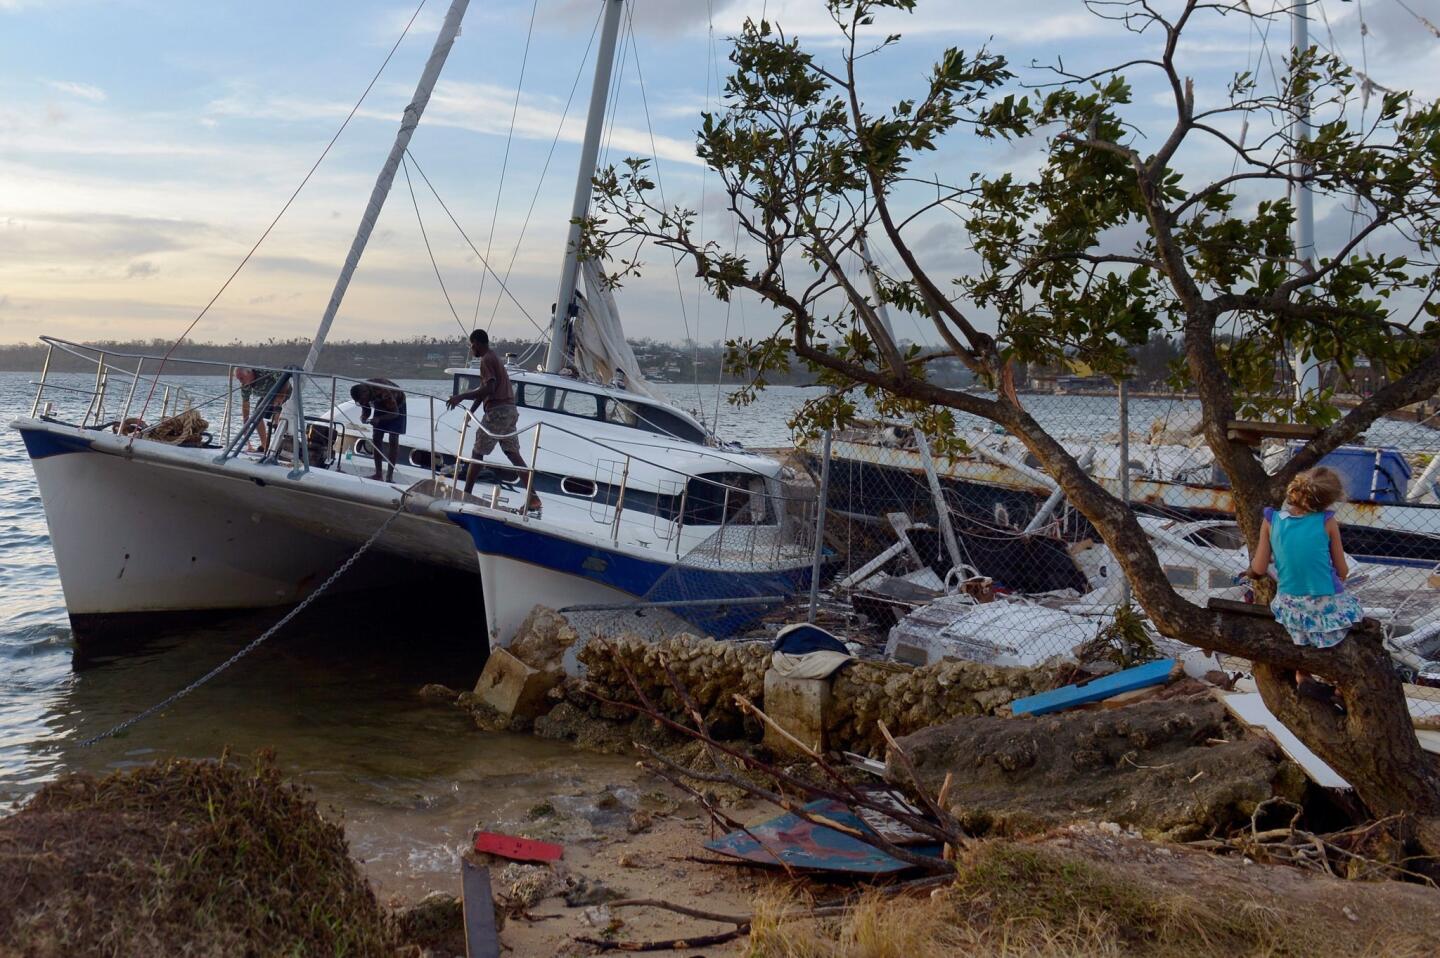 A boat that ran aground in Port Vila in cyclone-ravaged Vanuatu after Cyclone Pam tore through the area, packing wind gusts of up to 168 miles an hour.